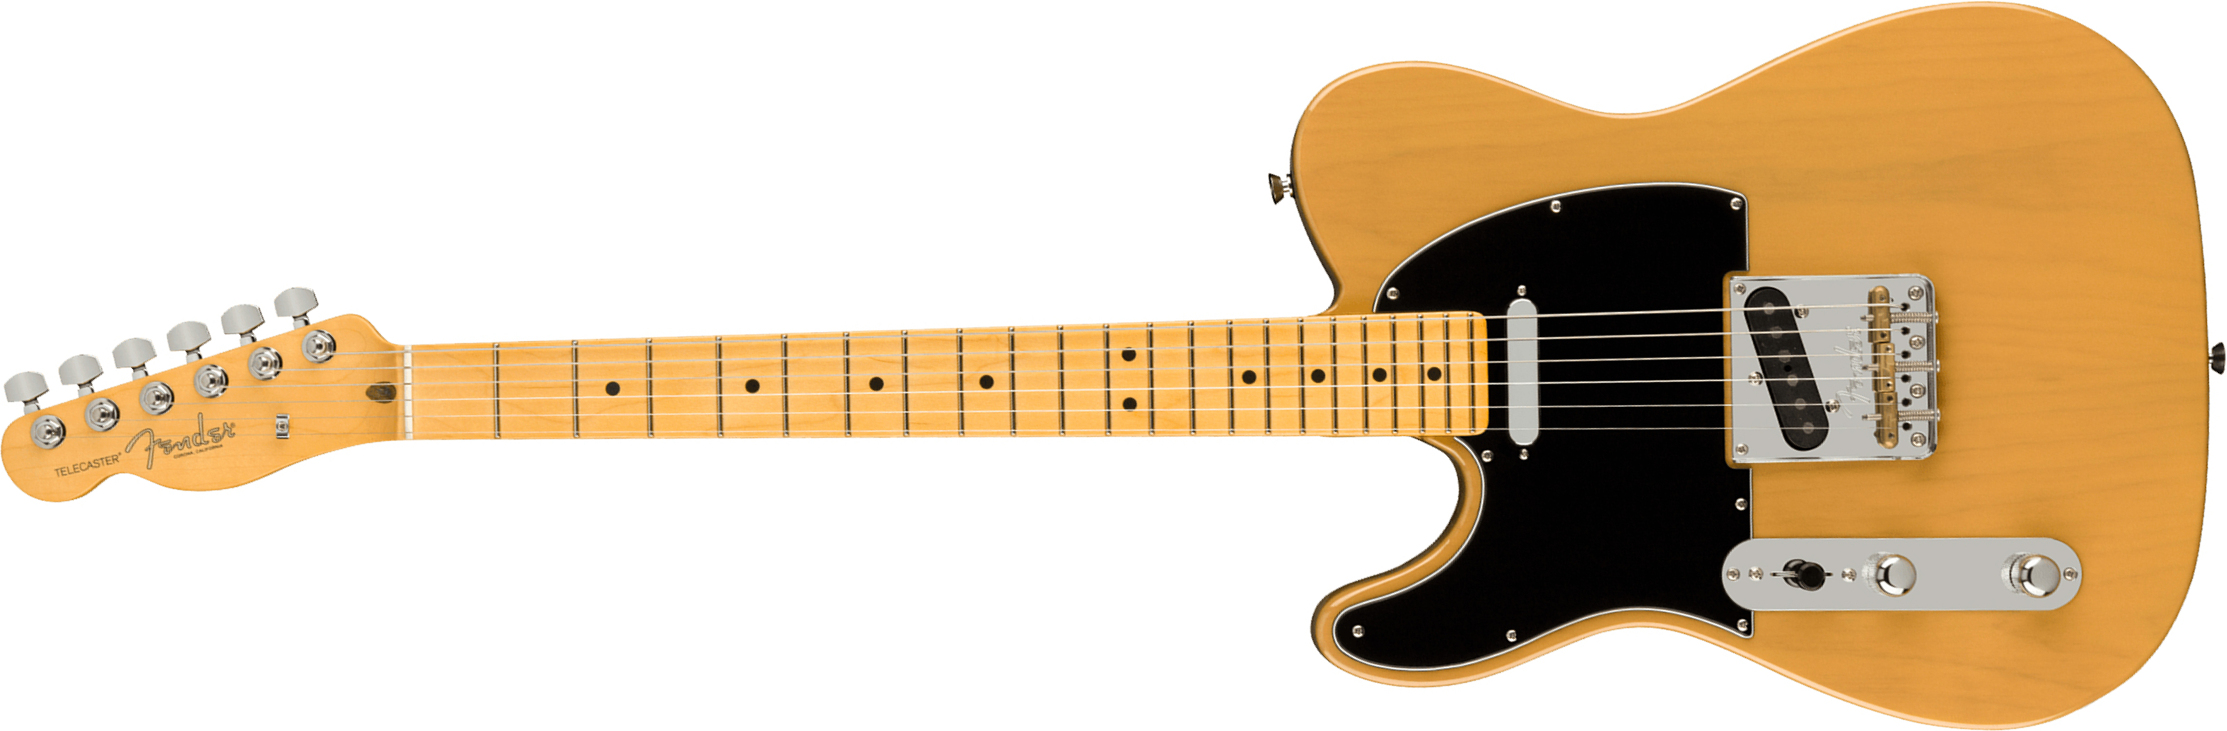 Fender Tele American Professional Ii Lh Gaucher Usa Mn - Butterscotch Blonde - Left-handed electric guitar - Main picture